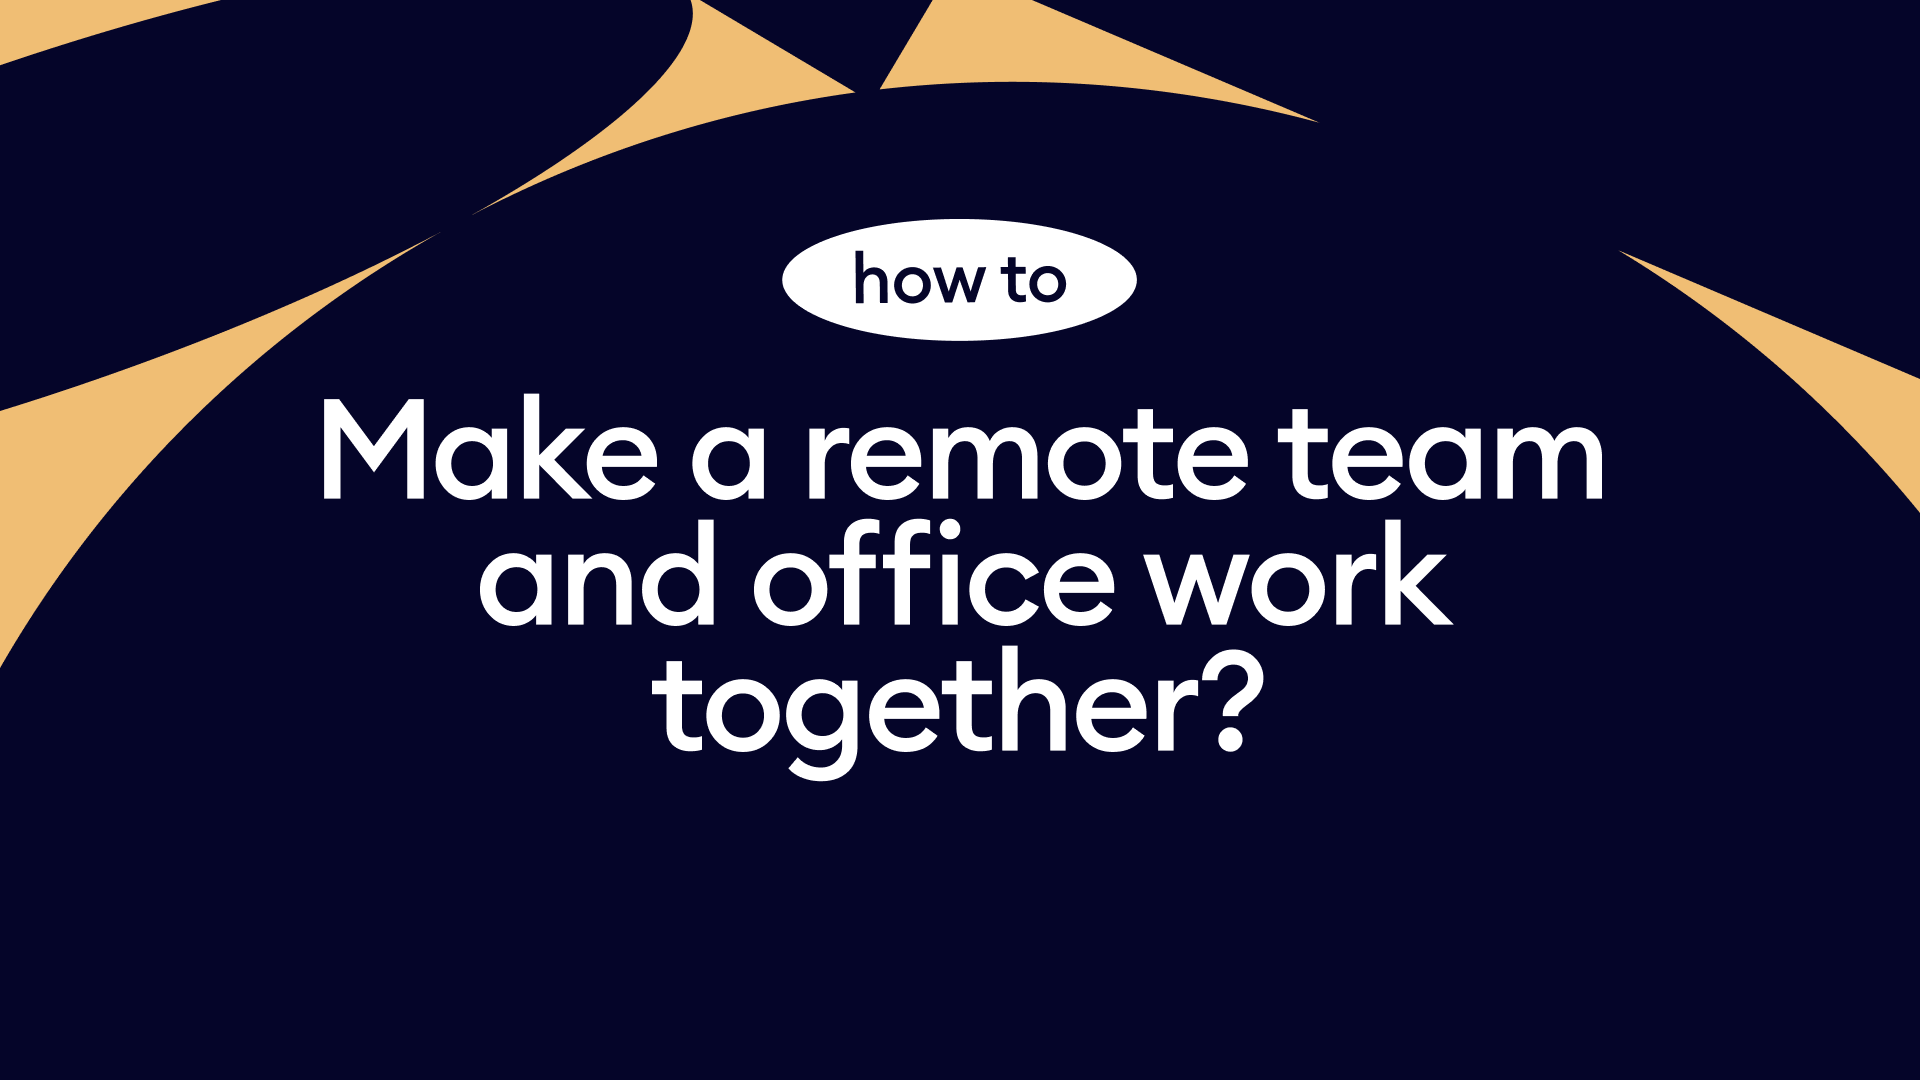 The Shift to Hybrid Workspace: How to make a remote team and office work together?